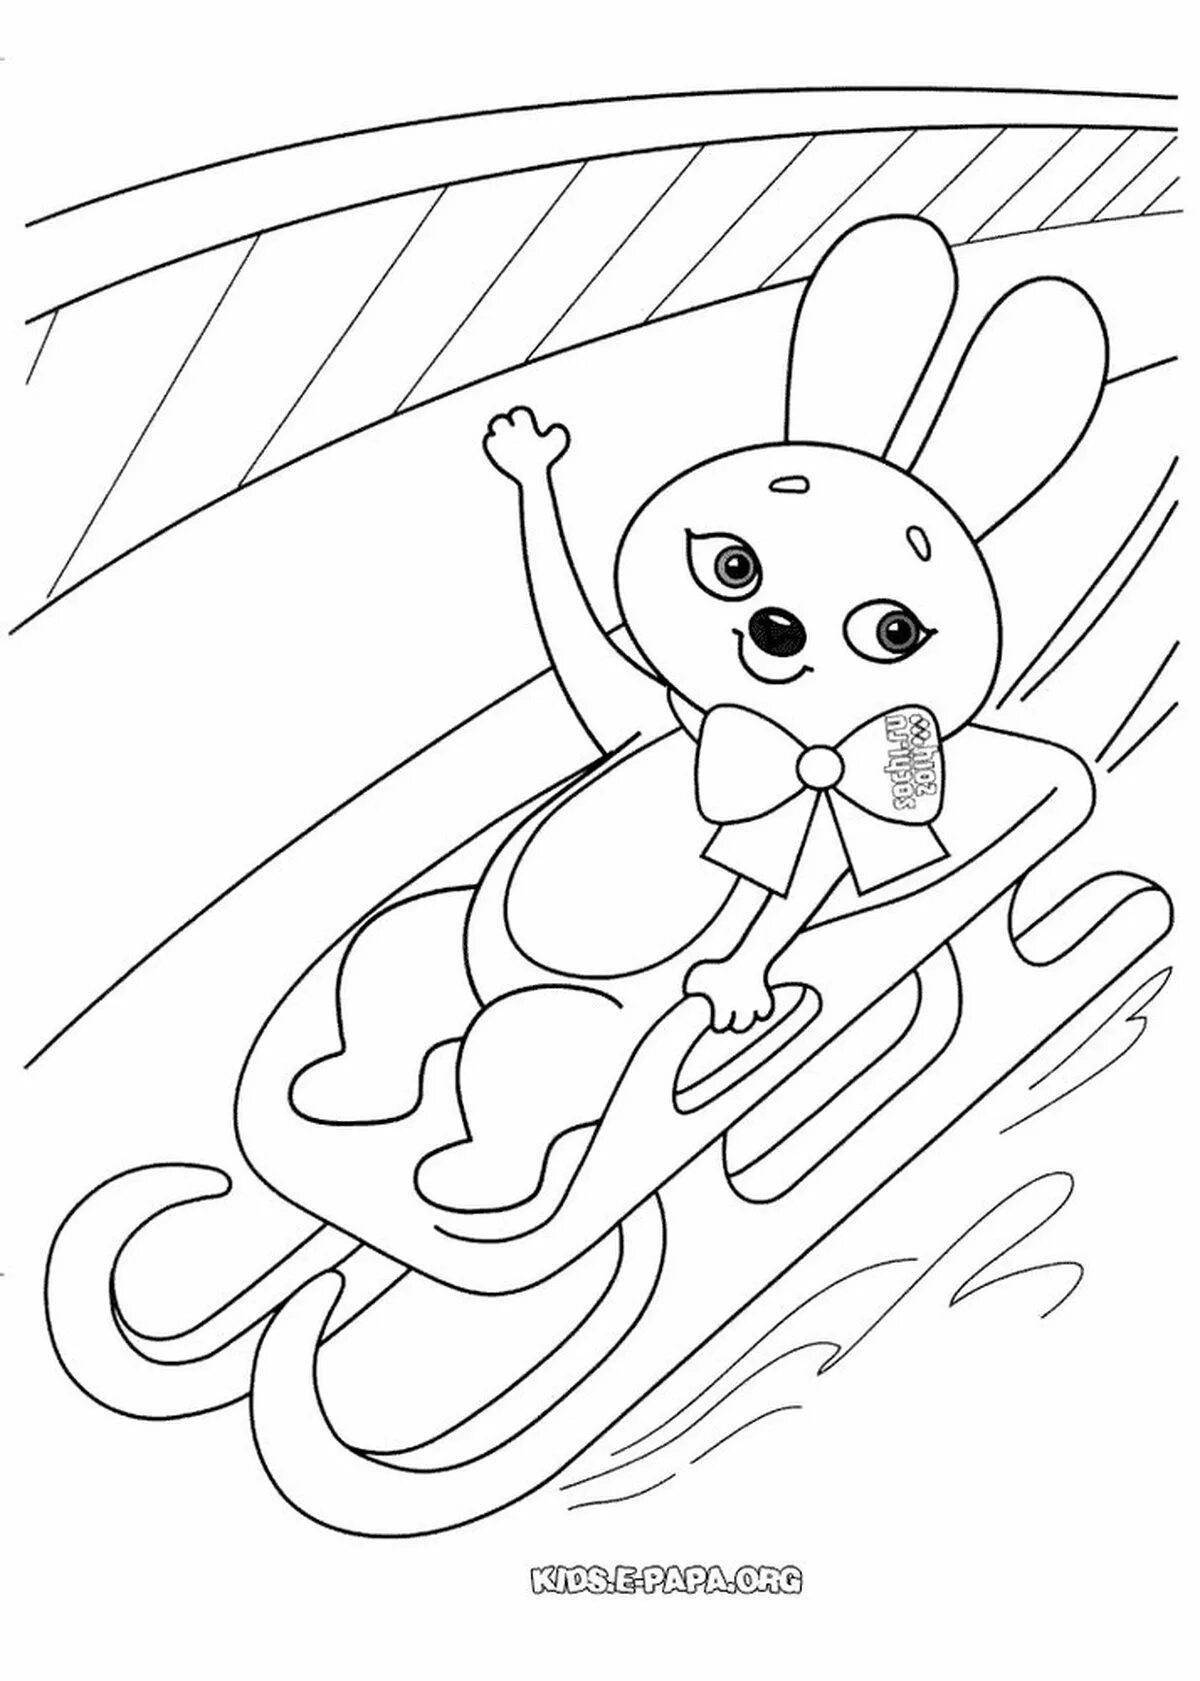 Coloring page dazzling olympic winter sports